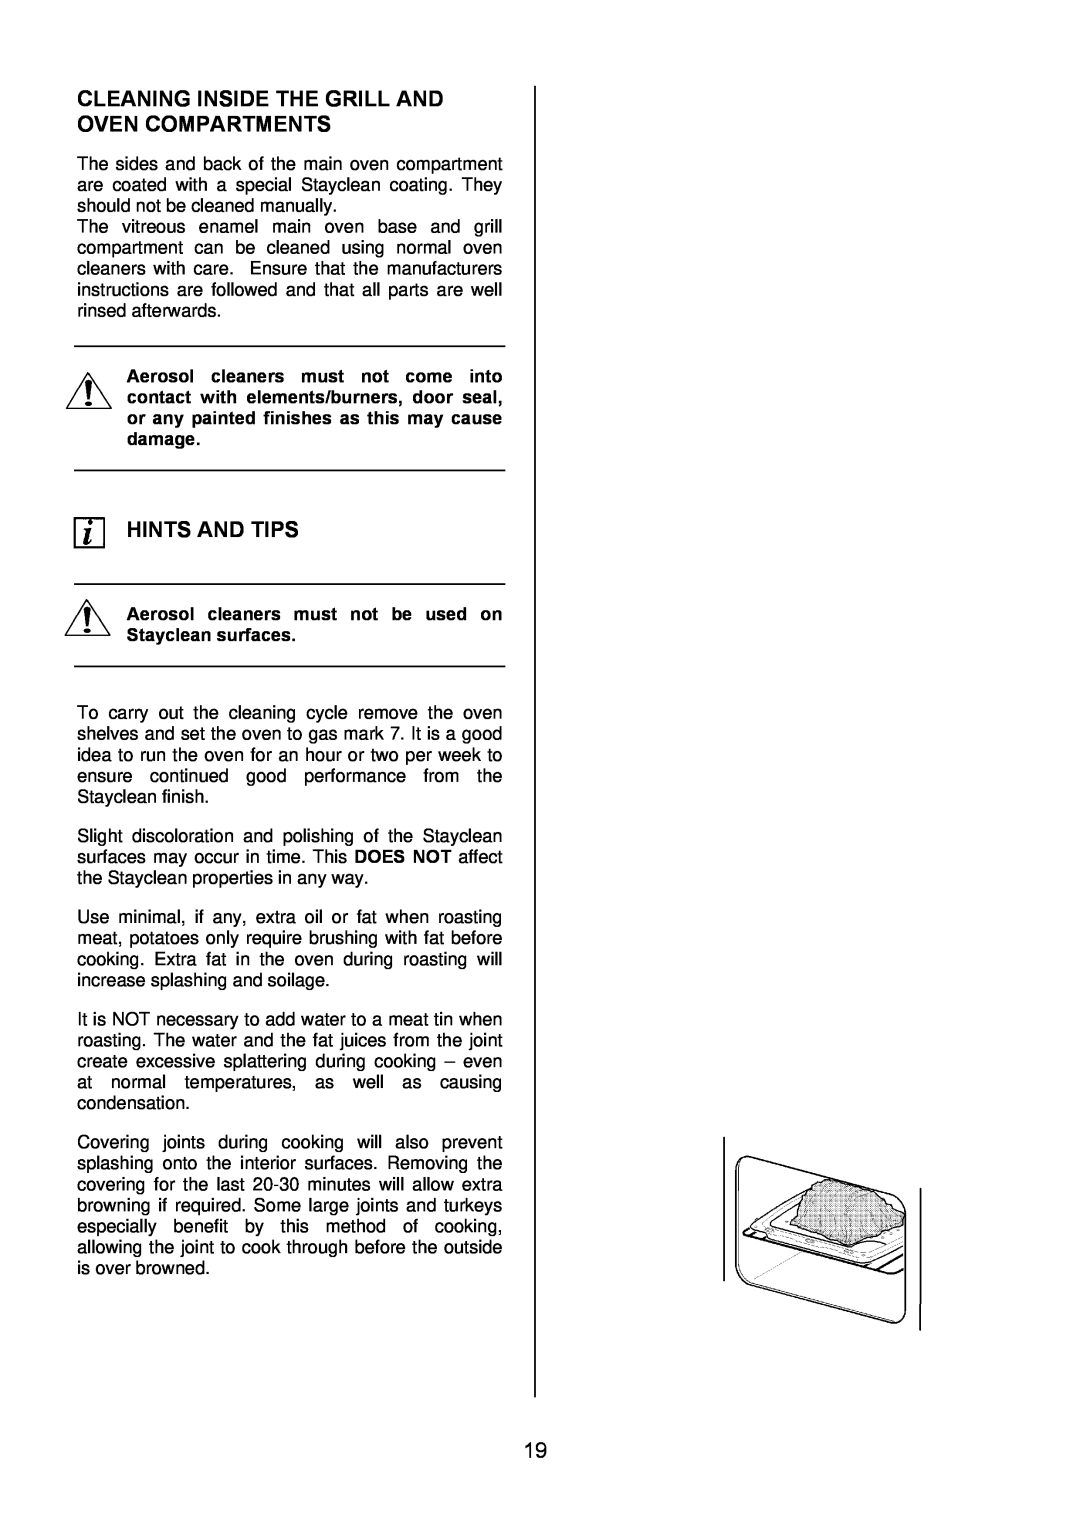 Electrolux EKG5542, EKG5543 manual Cleaning Inside The Grill And Oven Compartments, Hints And Tips 